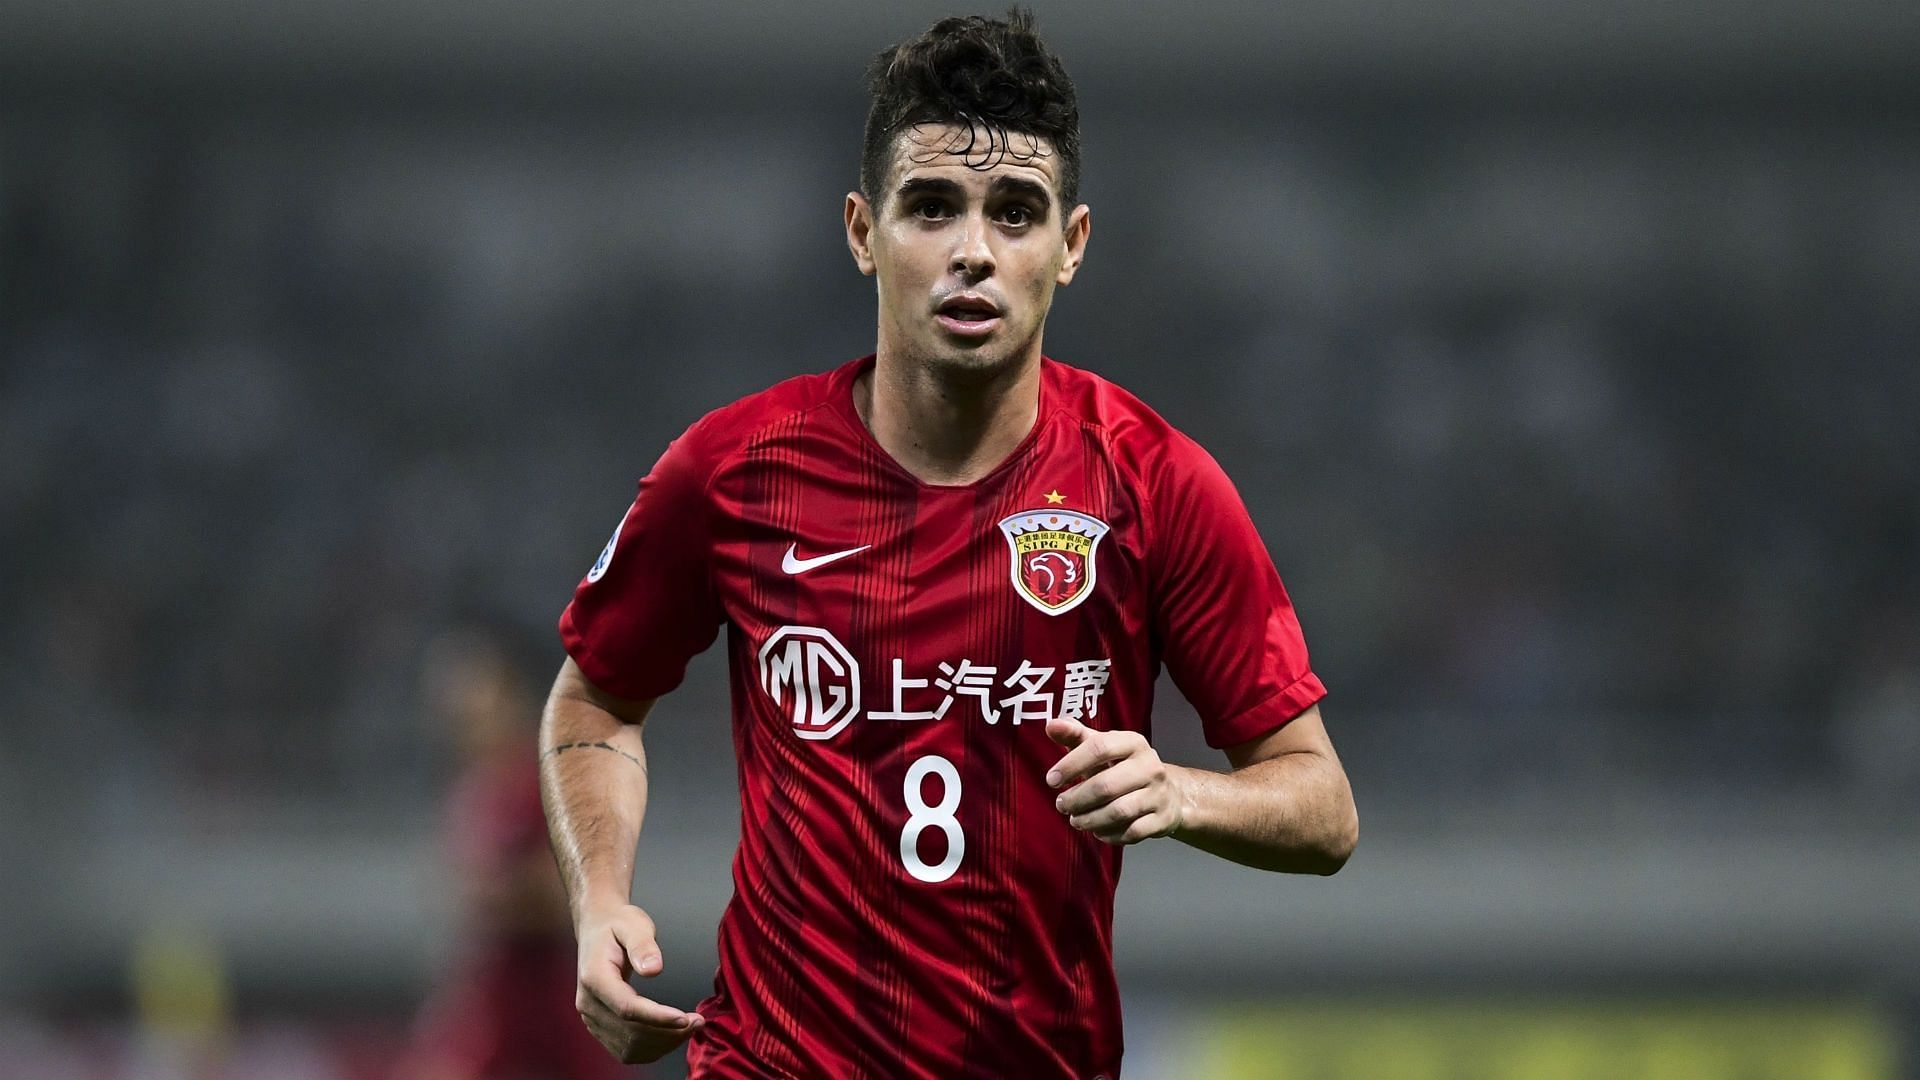 Shanghai Port face Shenzhen in their upcoming Chinese Super League fixture on Sunday